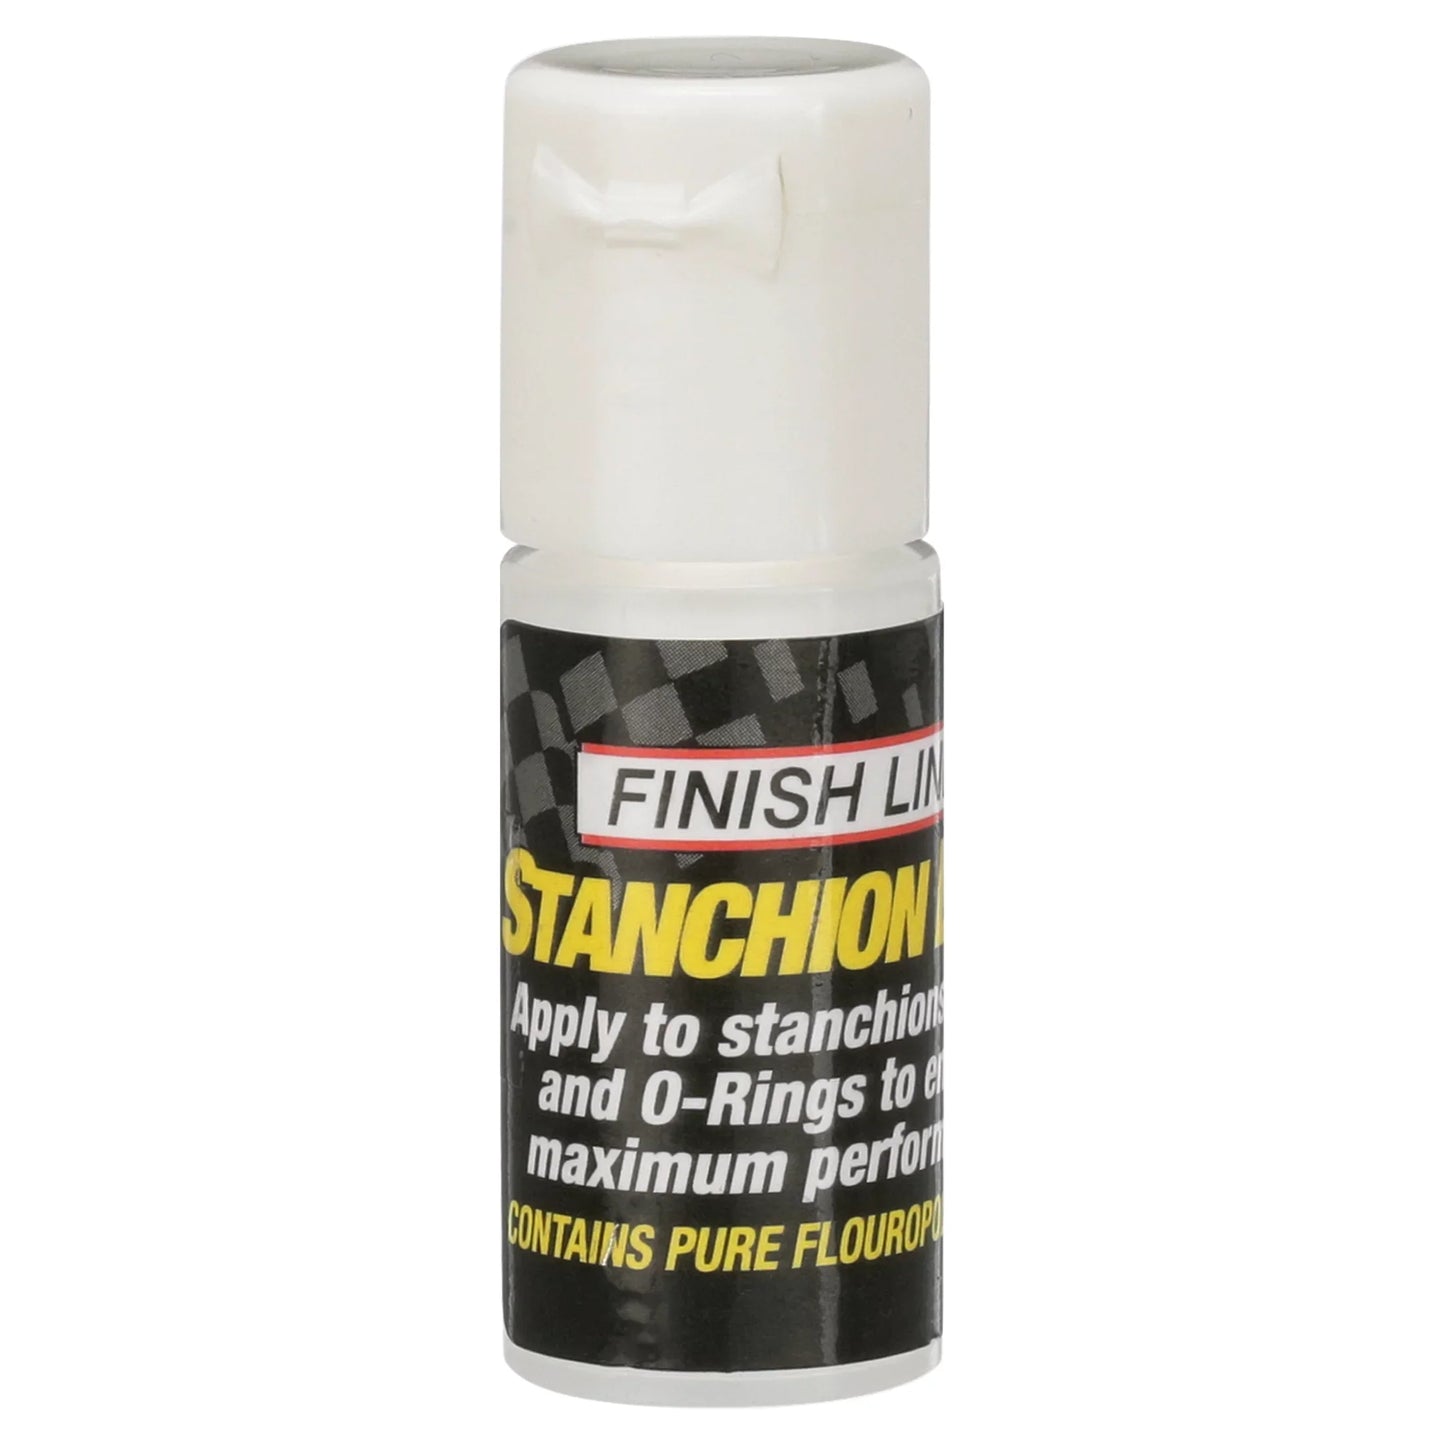 STANCHION LUBE, 15g